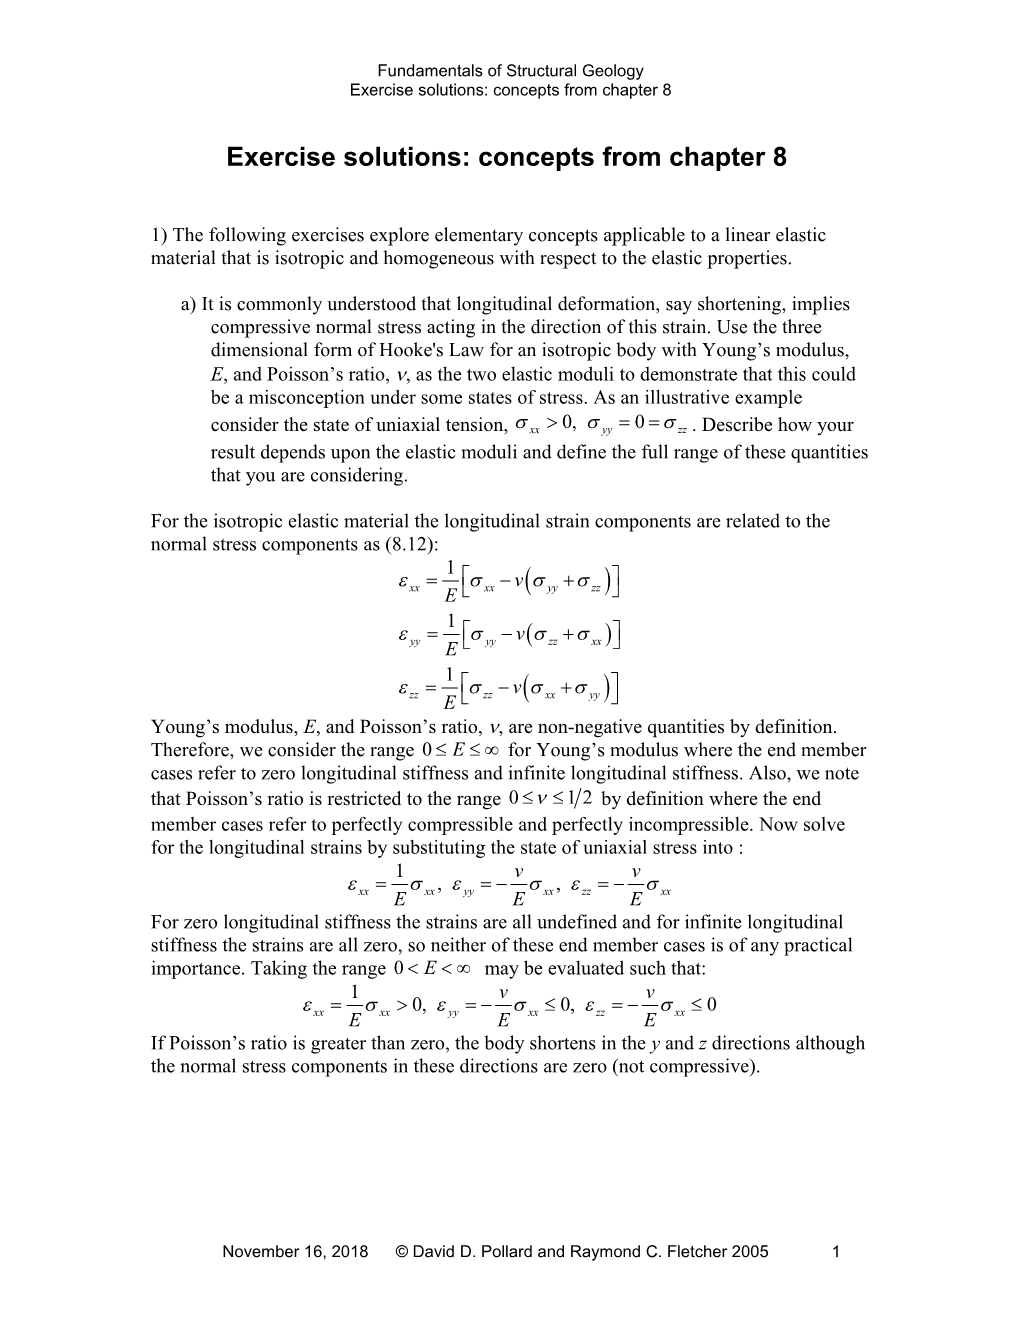 Exercise Solutions: Concepts from Chapter 8